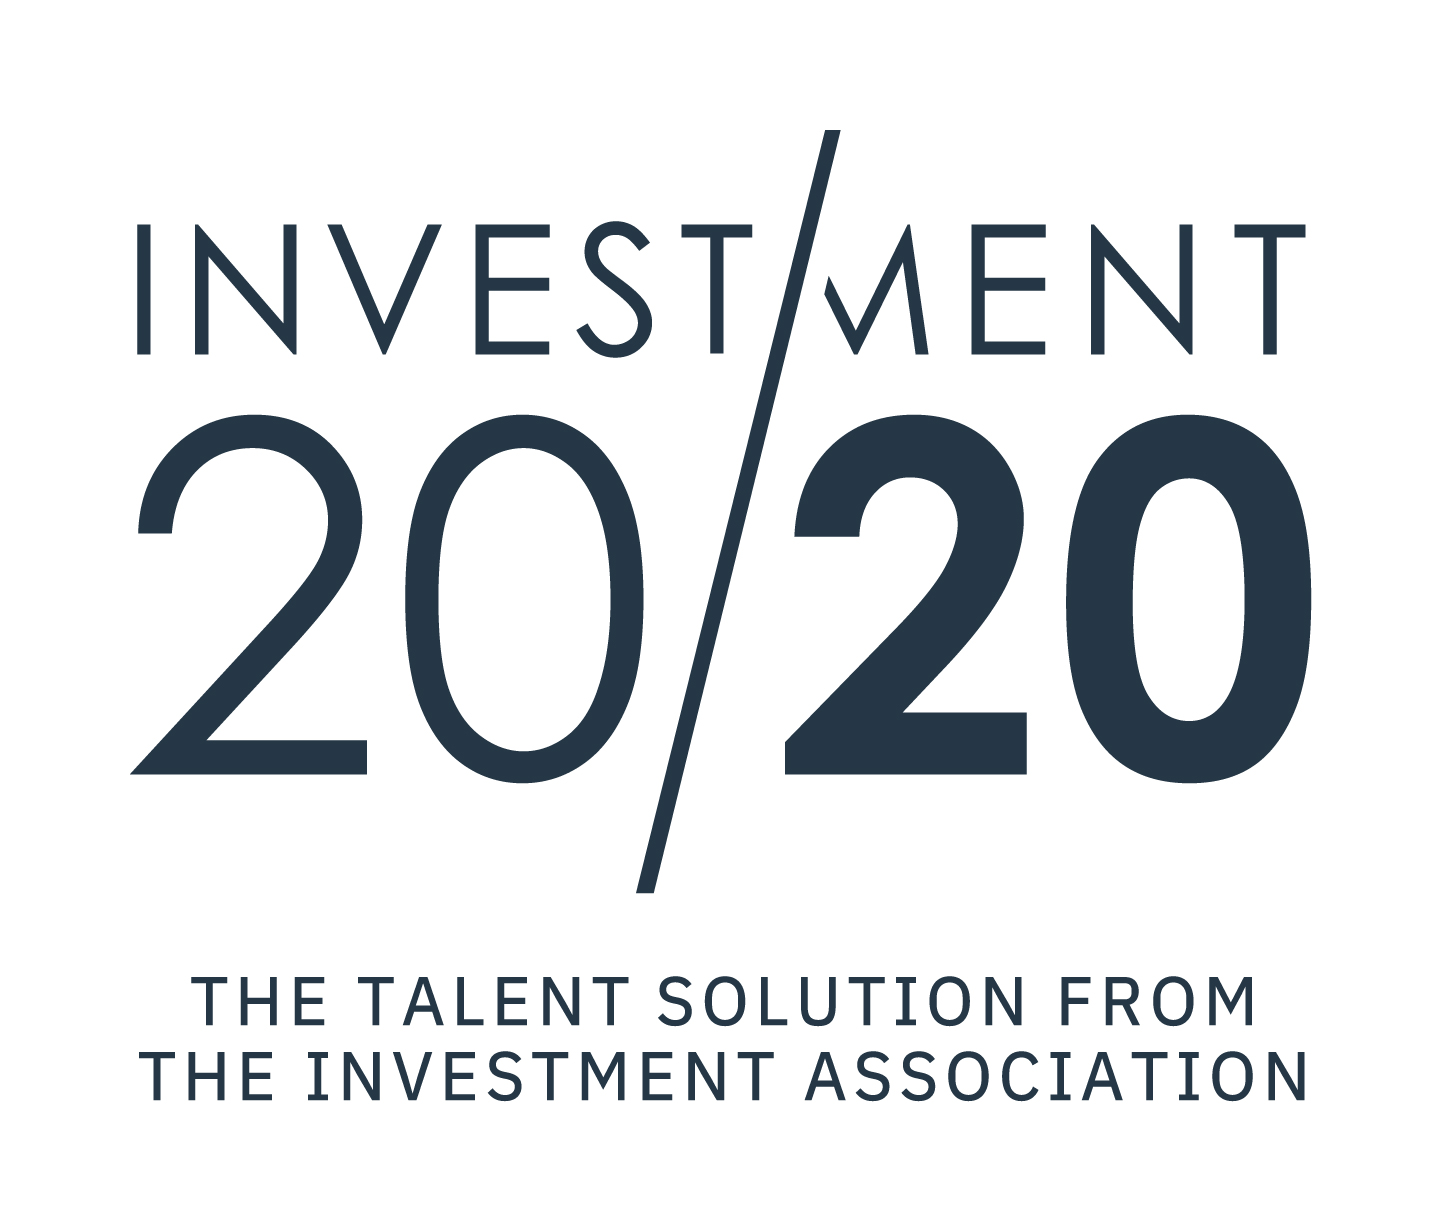 Colleges & Training Providers: Investment20/20 